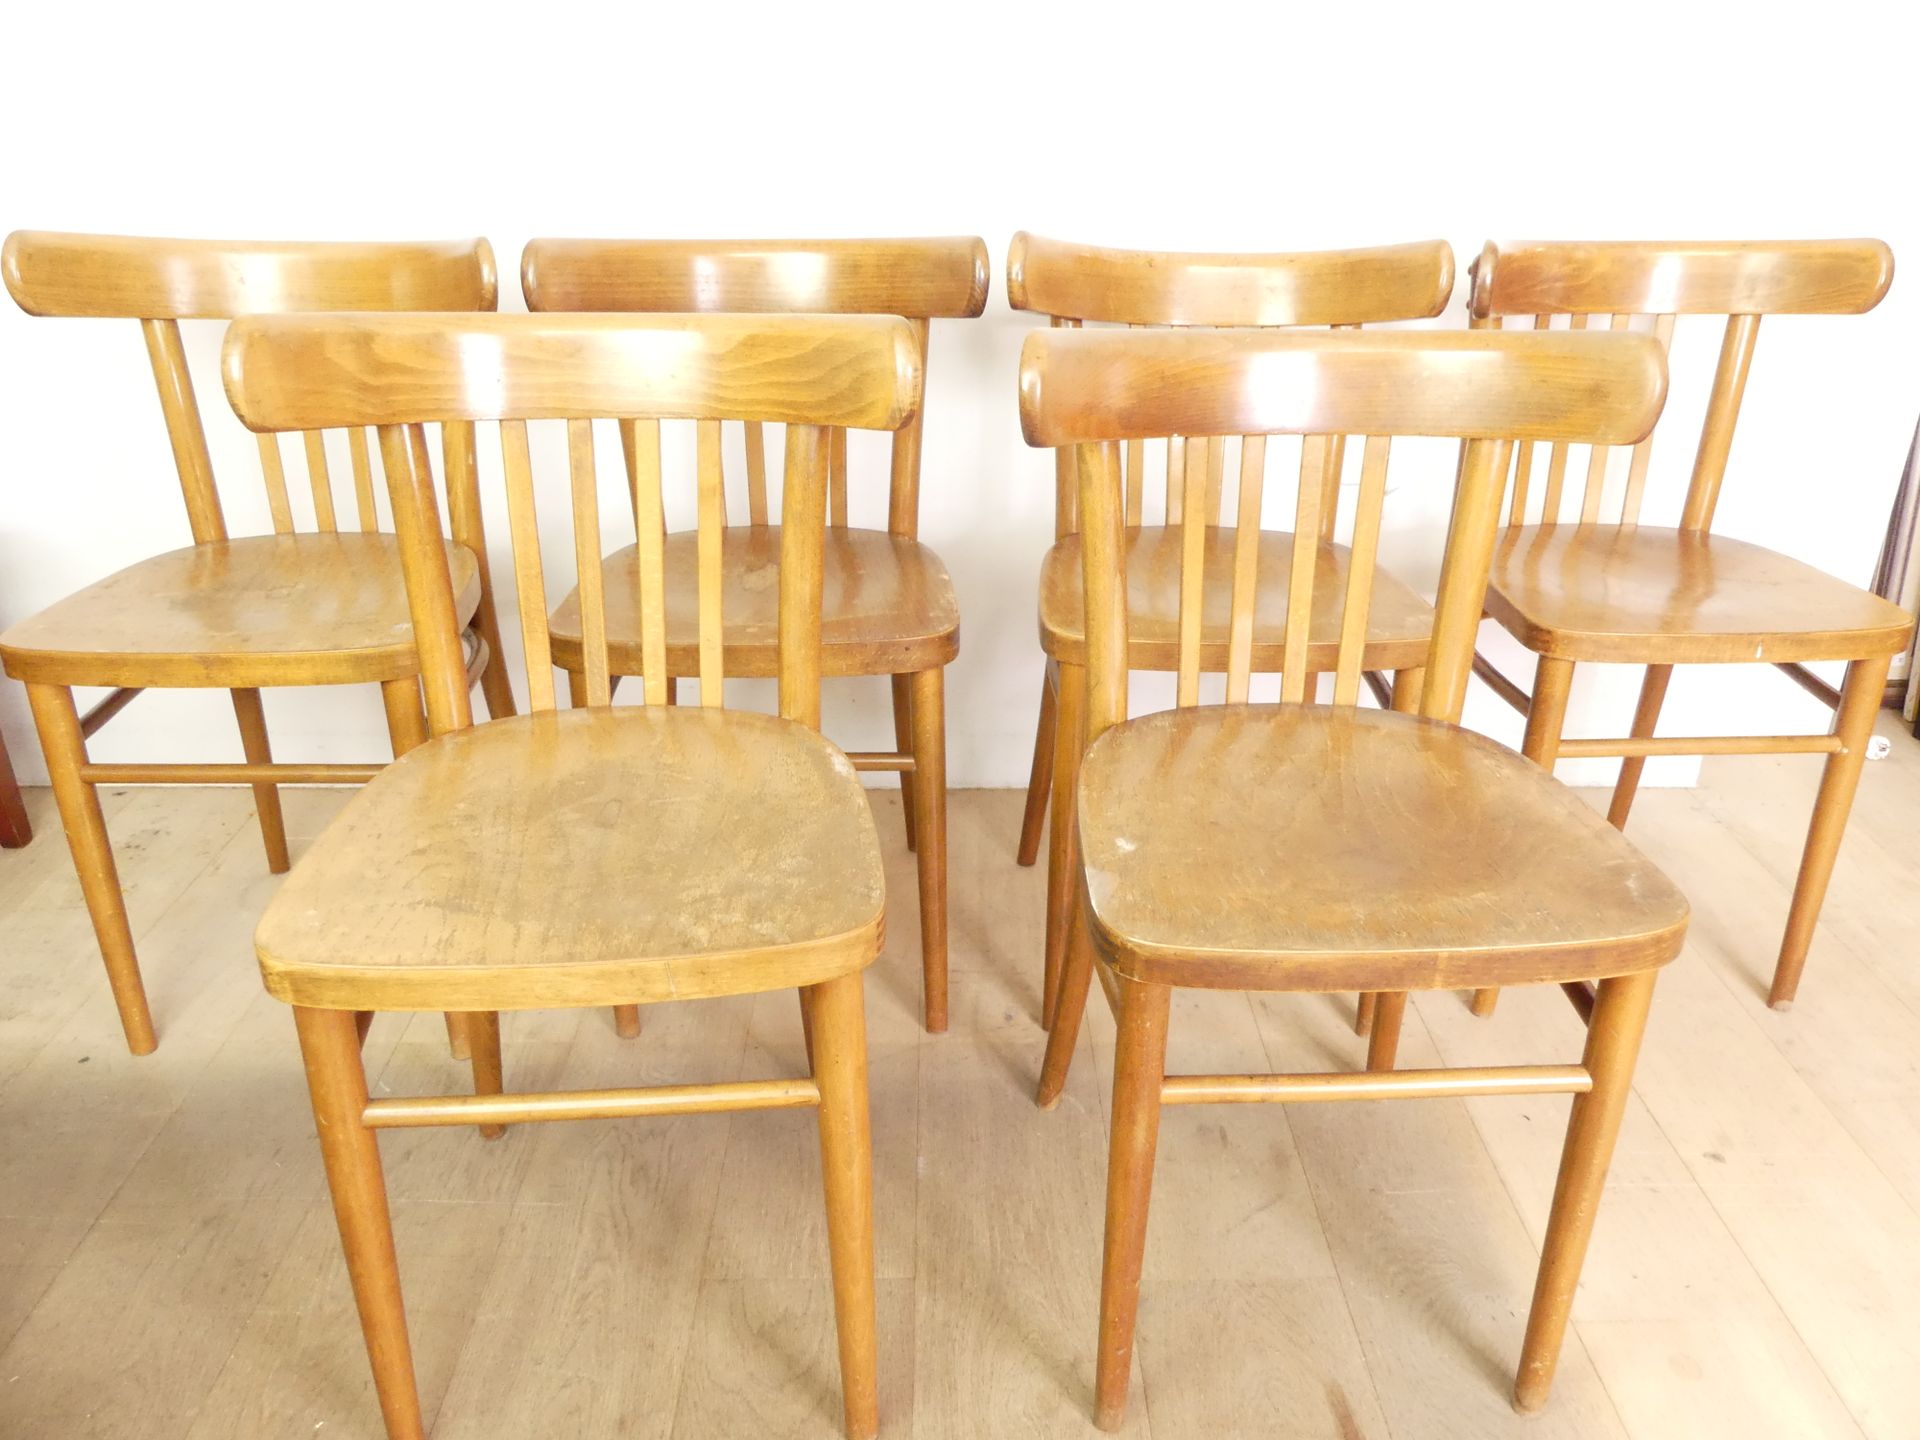 Null 6 wooden chairs in the style of Baumann, mid 20th century